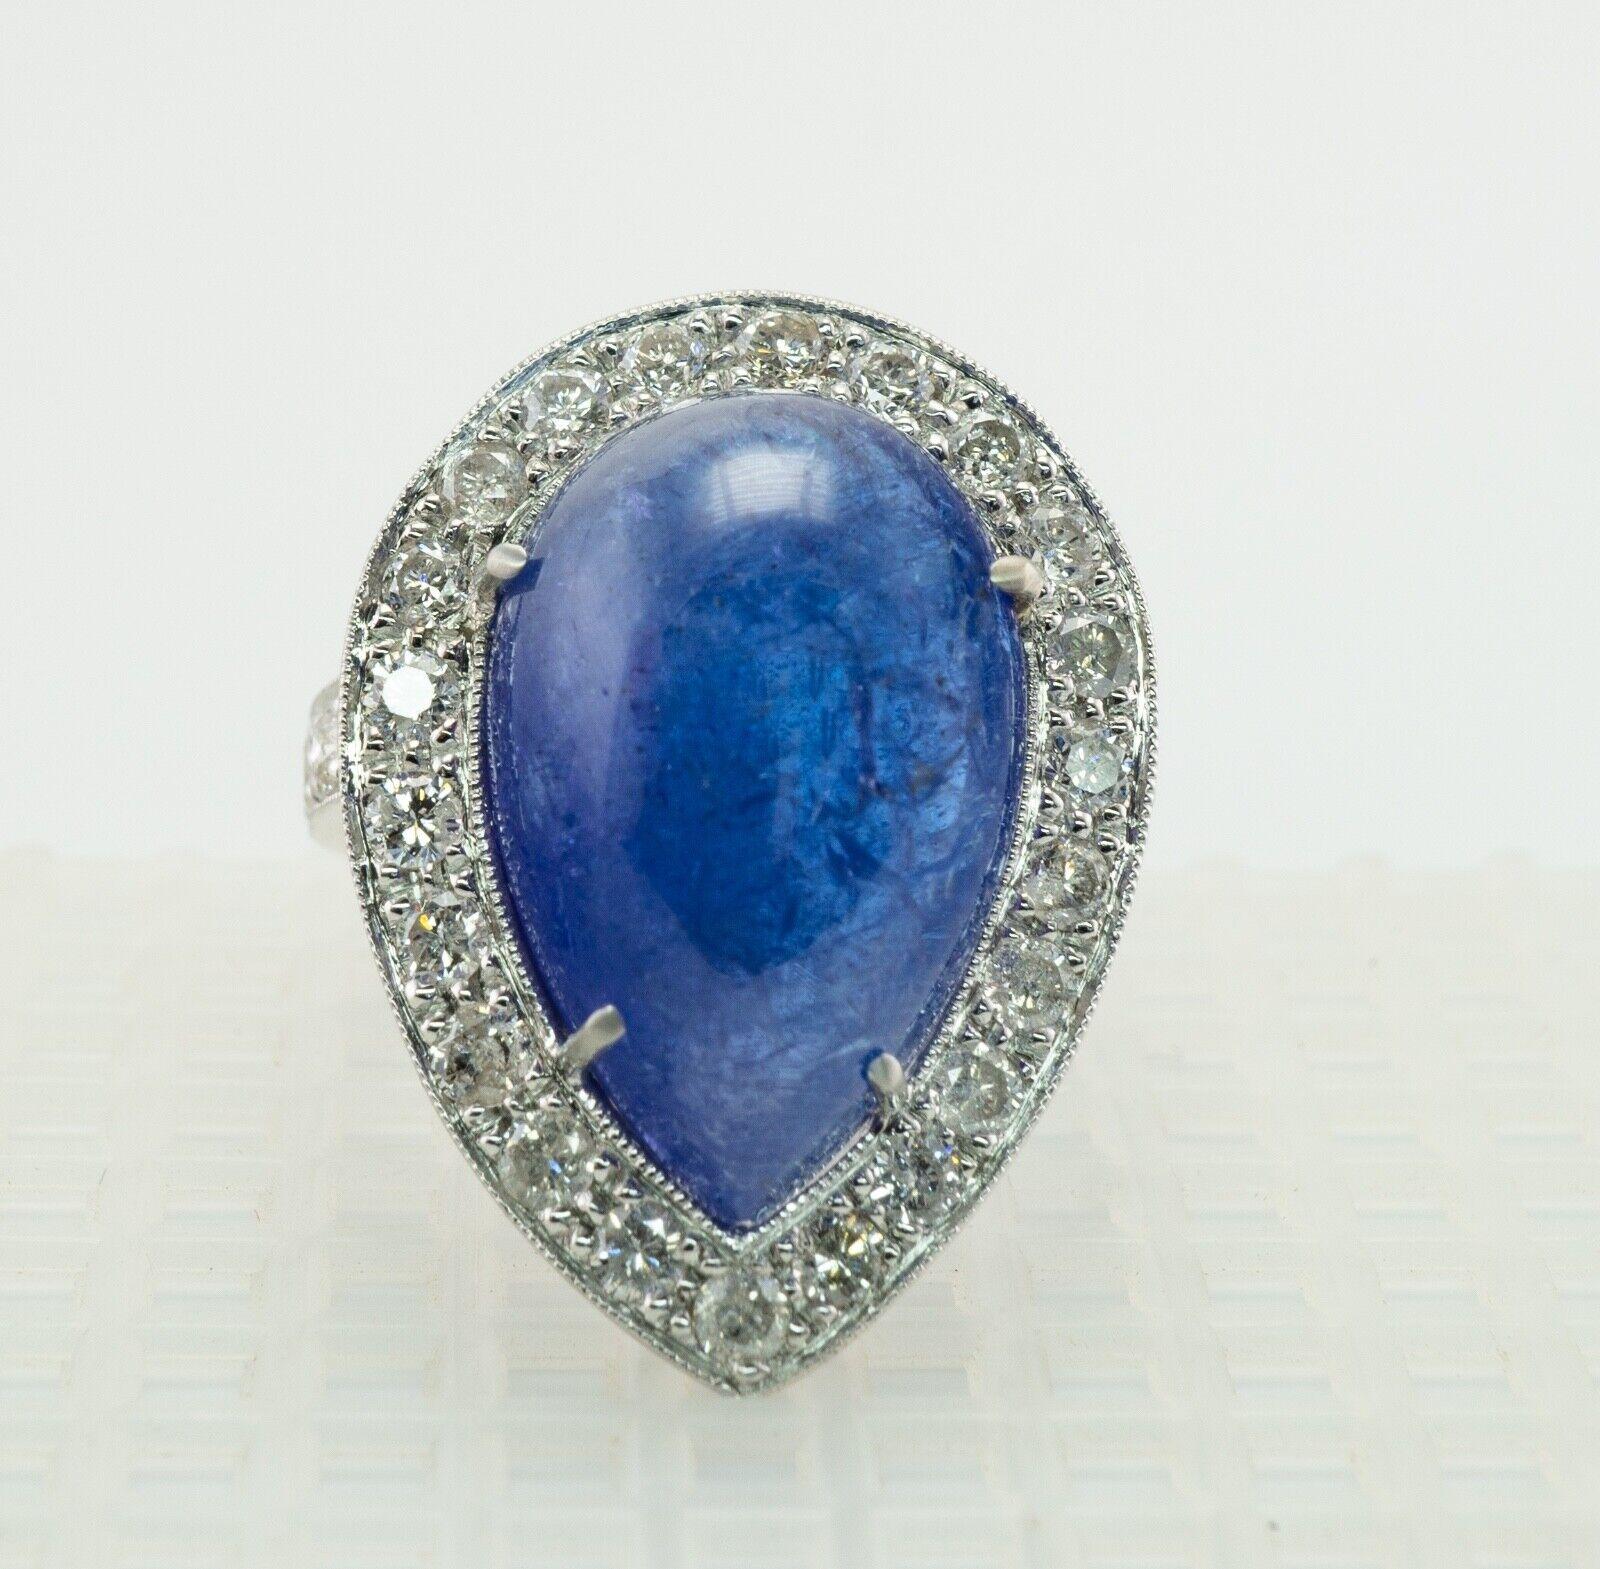 This stunning vintage ring is finely crafted in solid luxurious Platinum and set with genuine Earth mined Sapphire cabochon and diamonds. The center pear cut Sapphire measures 18mm x 12mm (16.33 carats). It has a violet undertone, natural inside